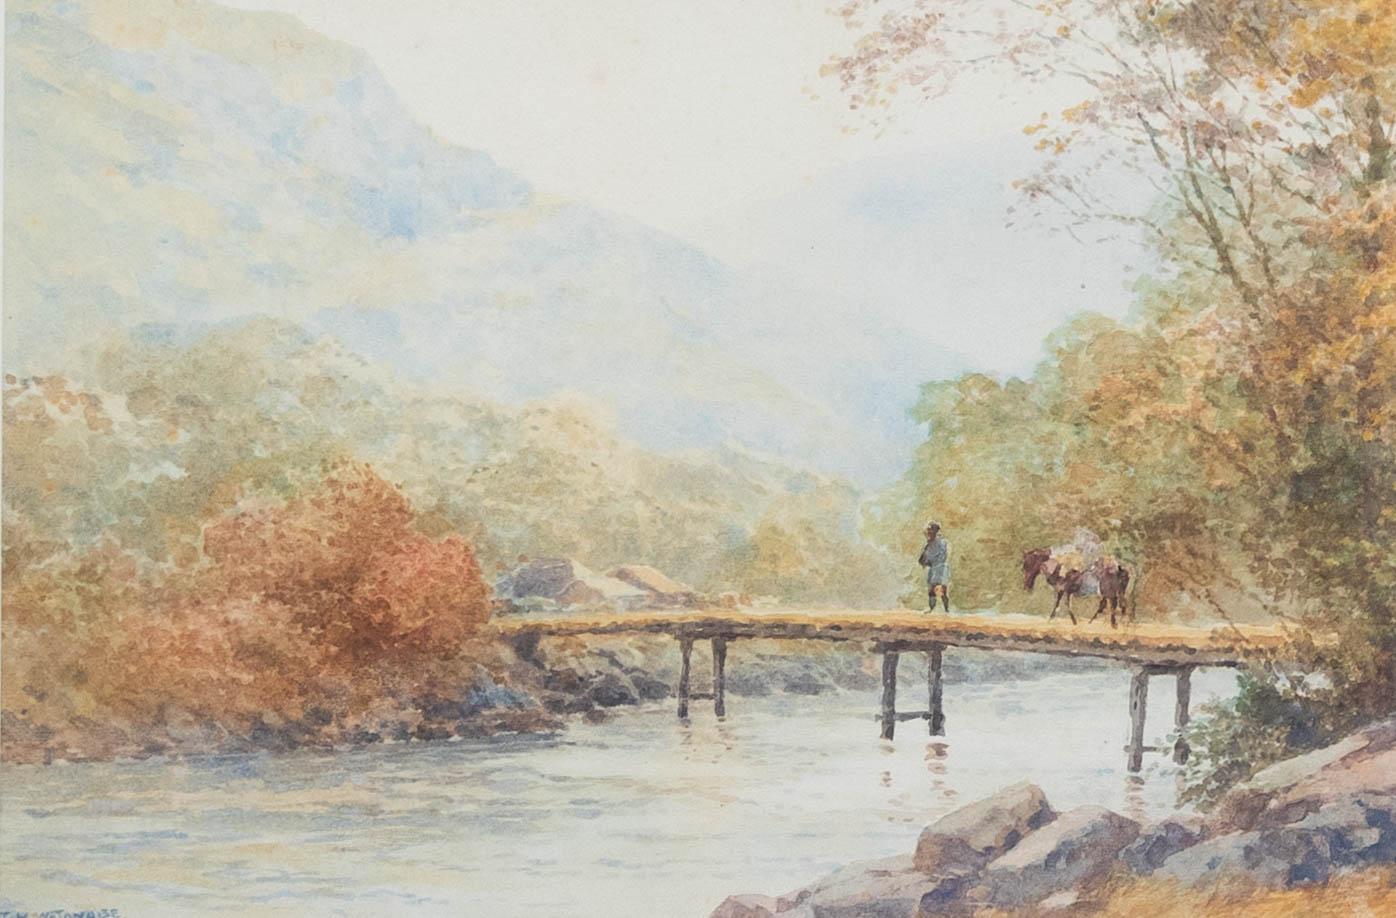 T. H. Watanabe - Early 20th Century Watercolour, River Crossing Near Chucheng - Art by Unknown